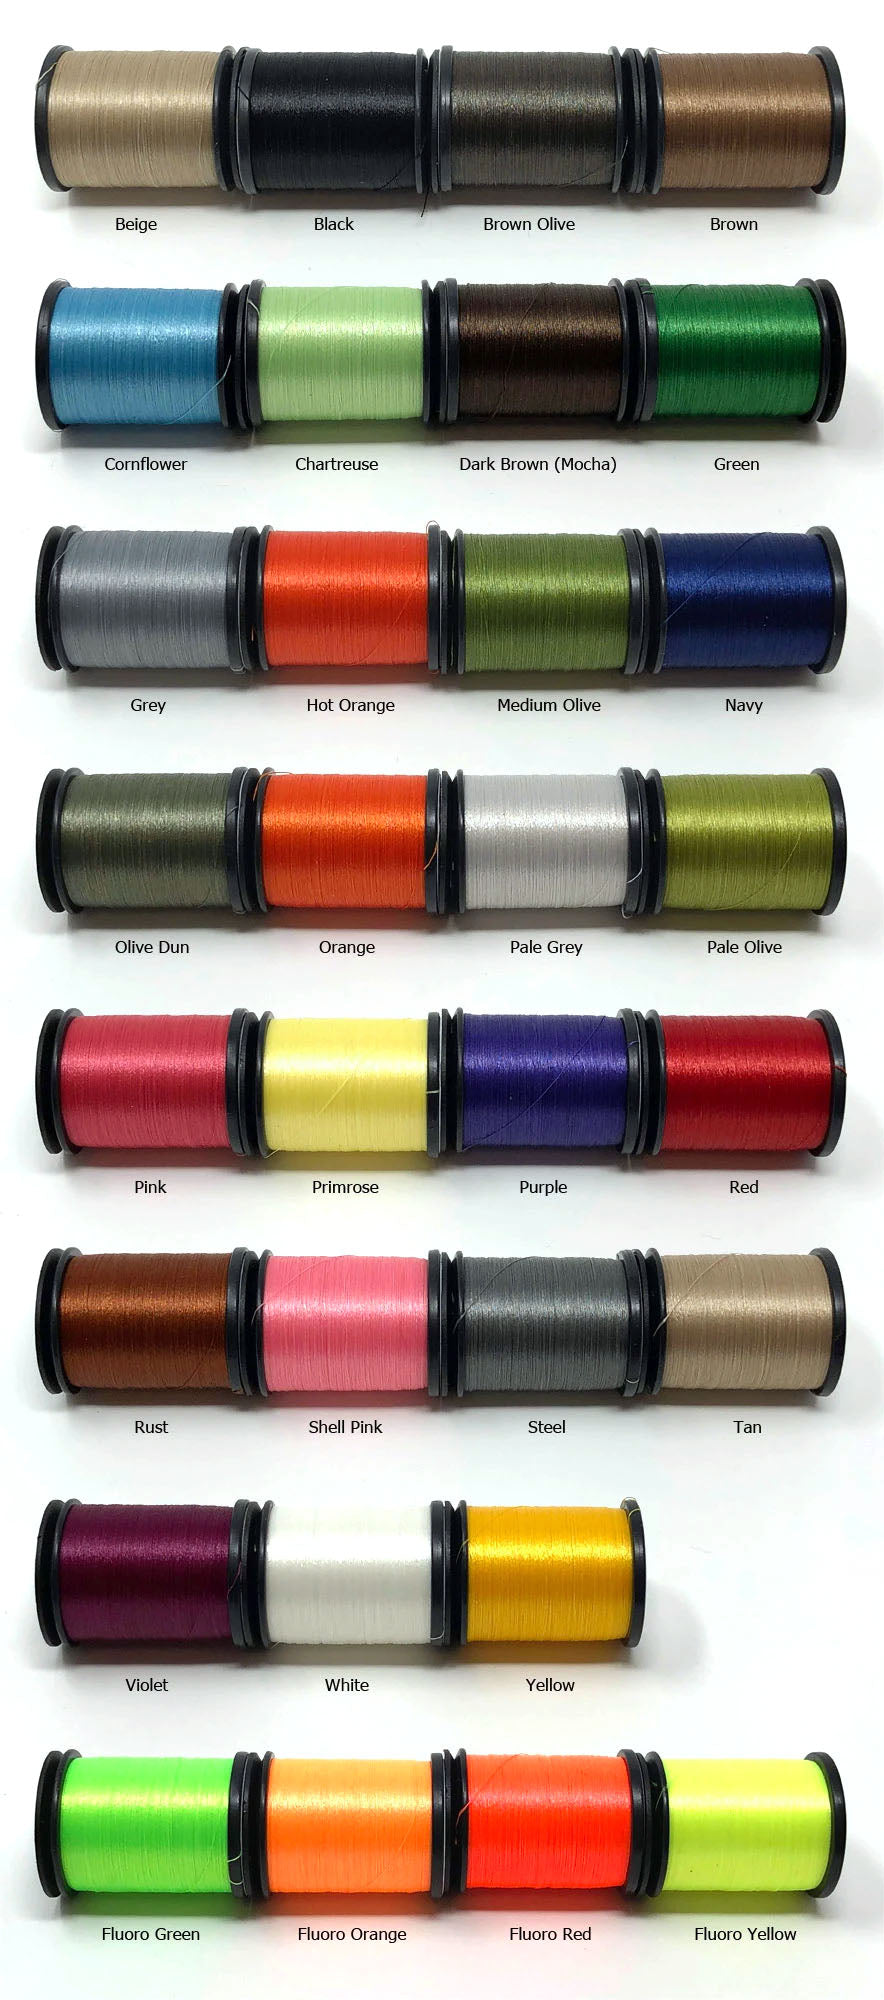 Photo of the 3/0 Big Game Semperfli Classic Waxed Thread featured with the name of each color below.